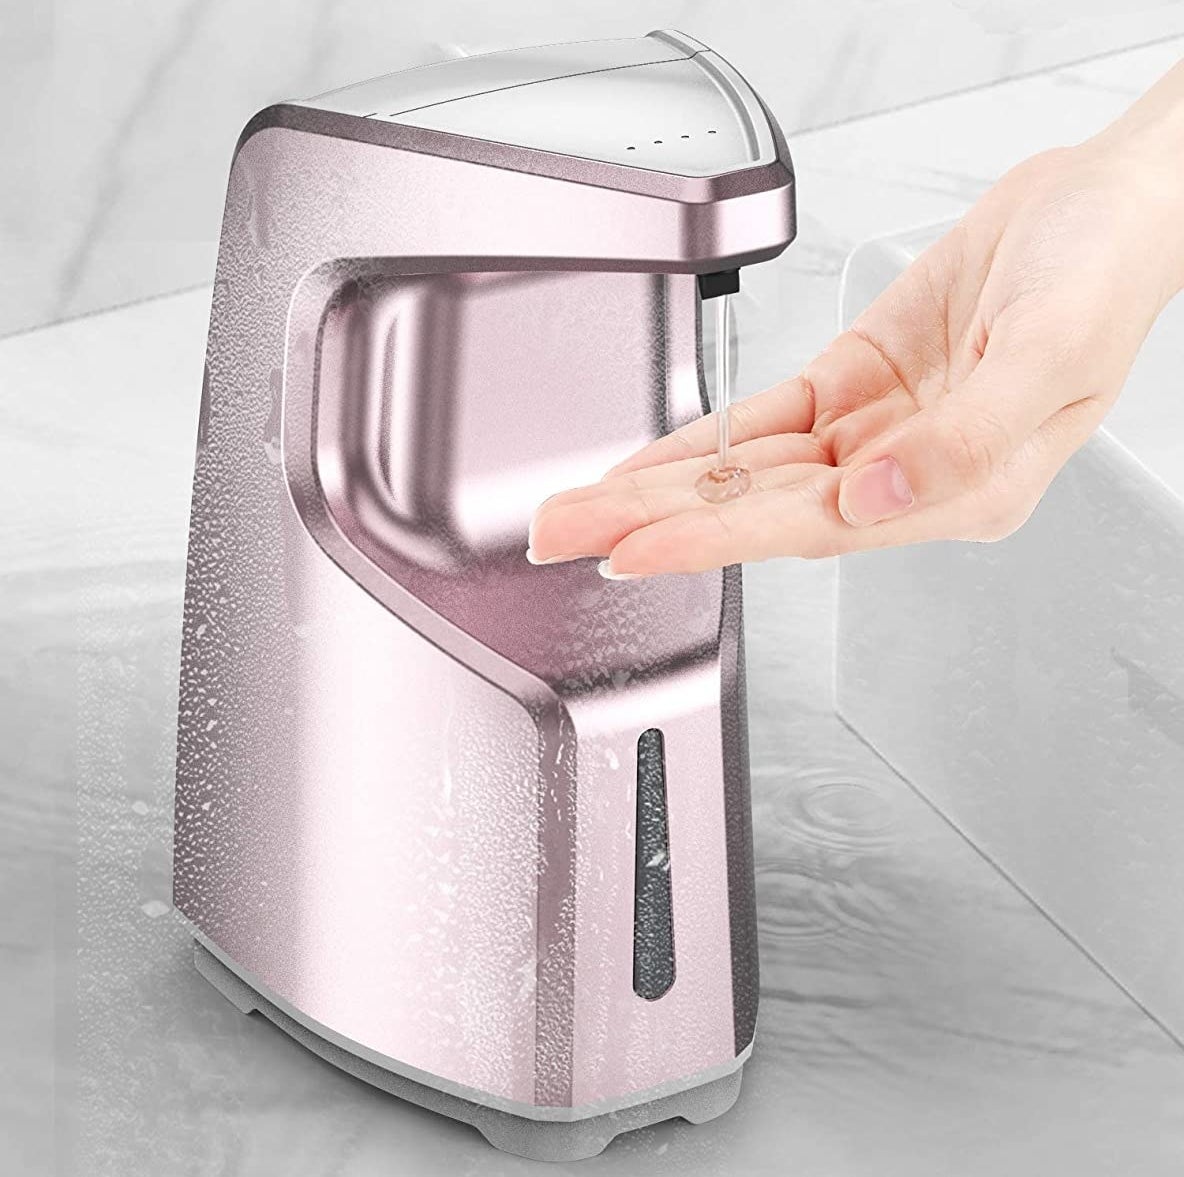 The dispenser dispensing soap into a person&#x27;s hand